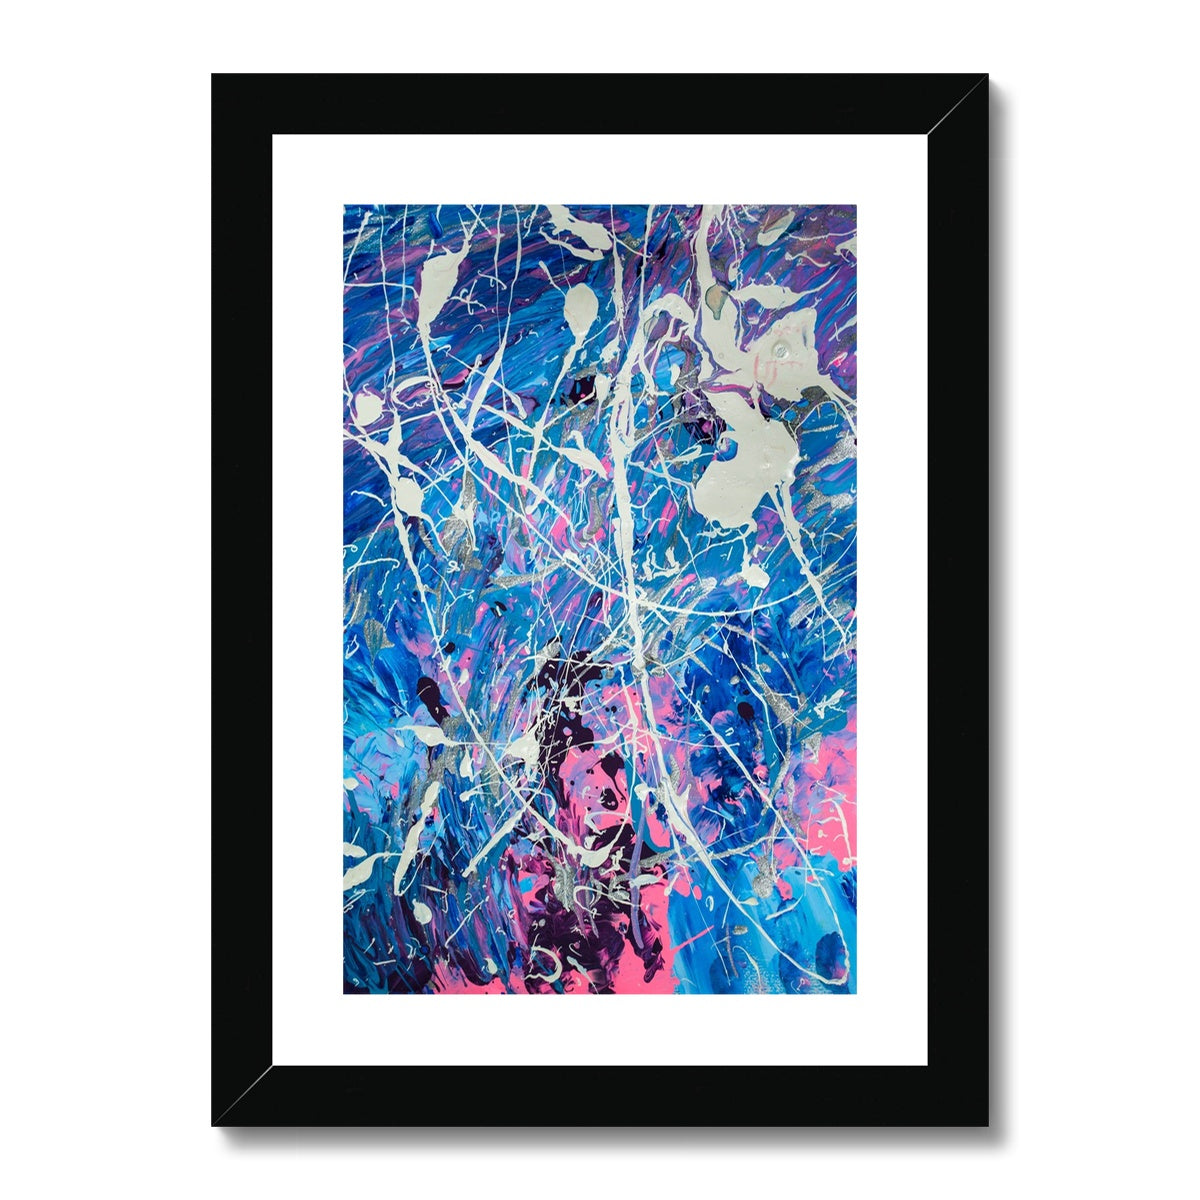 Messy Love Framed & Mounted Print